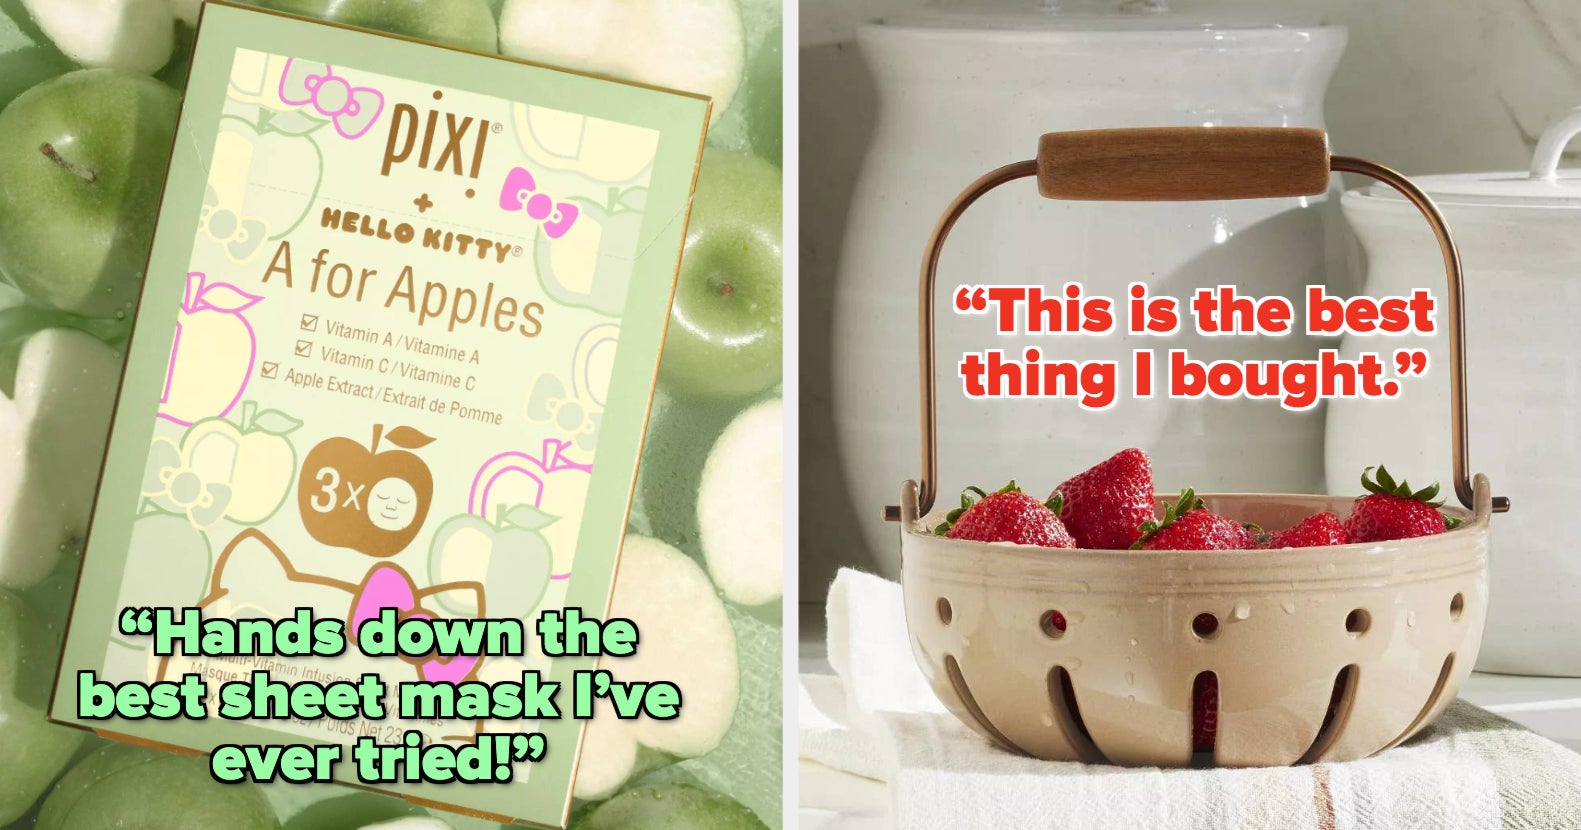 20 Target Items So Incredibly Beautiful, You Won’t Even Remember Their Original Practicality!